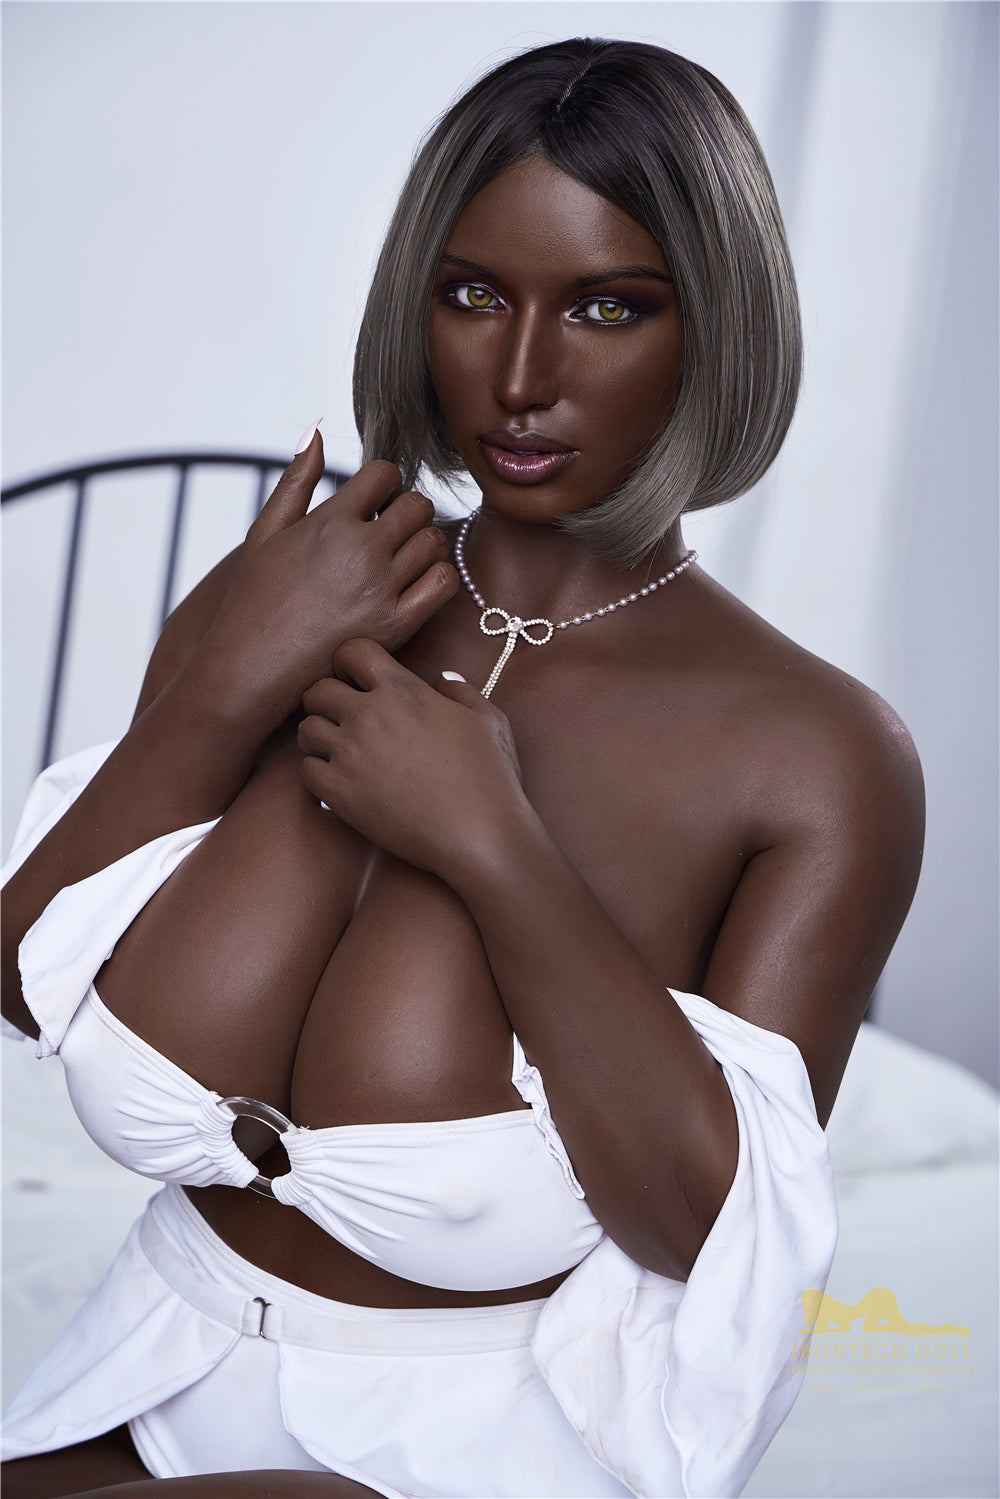 Irontech - Silicone Real Sex Doll - 5ft 3in (160cm) - Lily - Love Dolls 4U